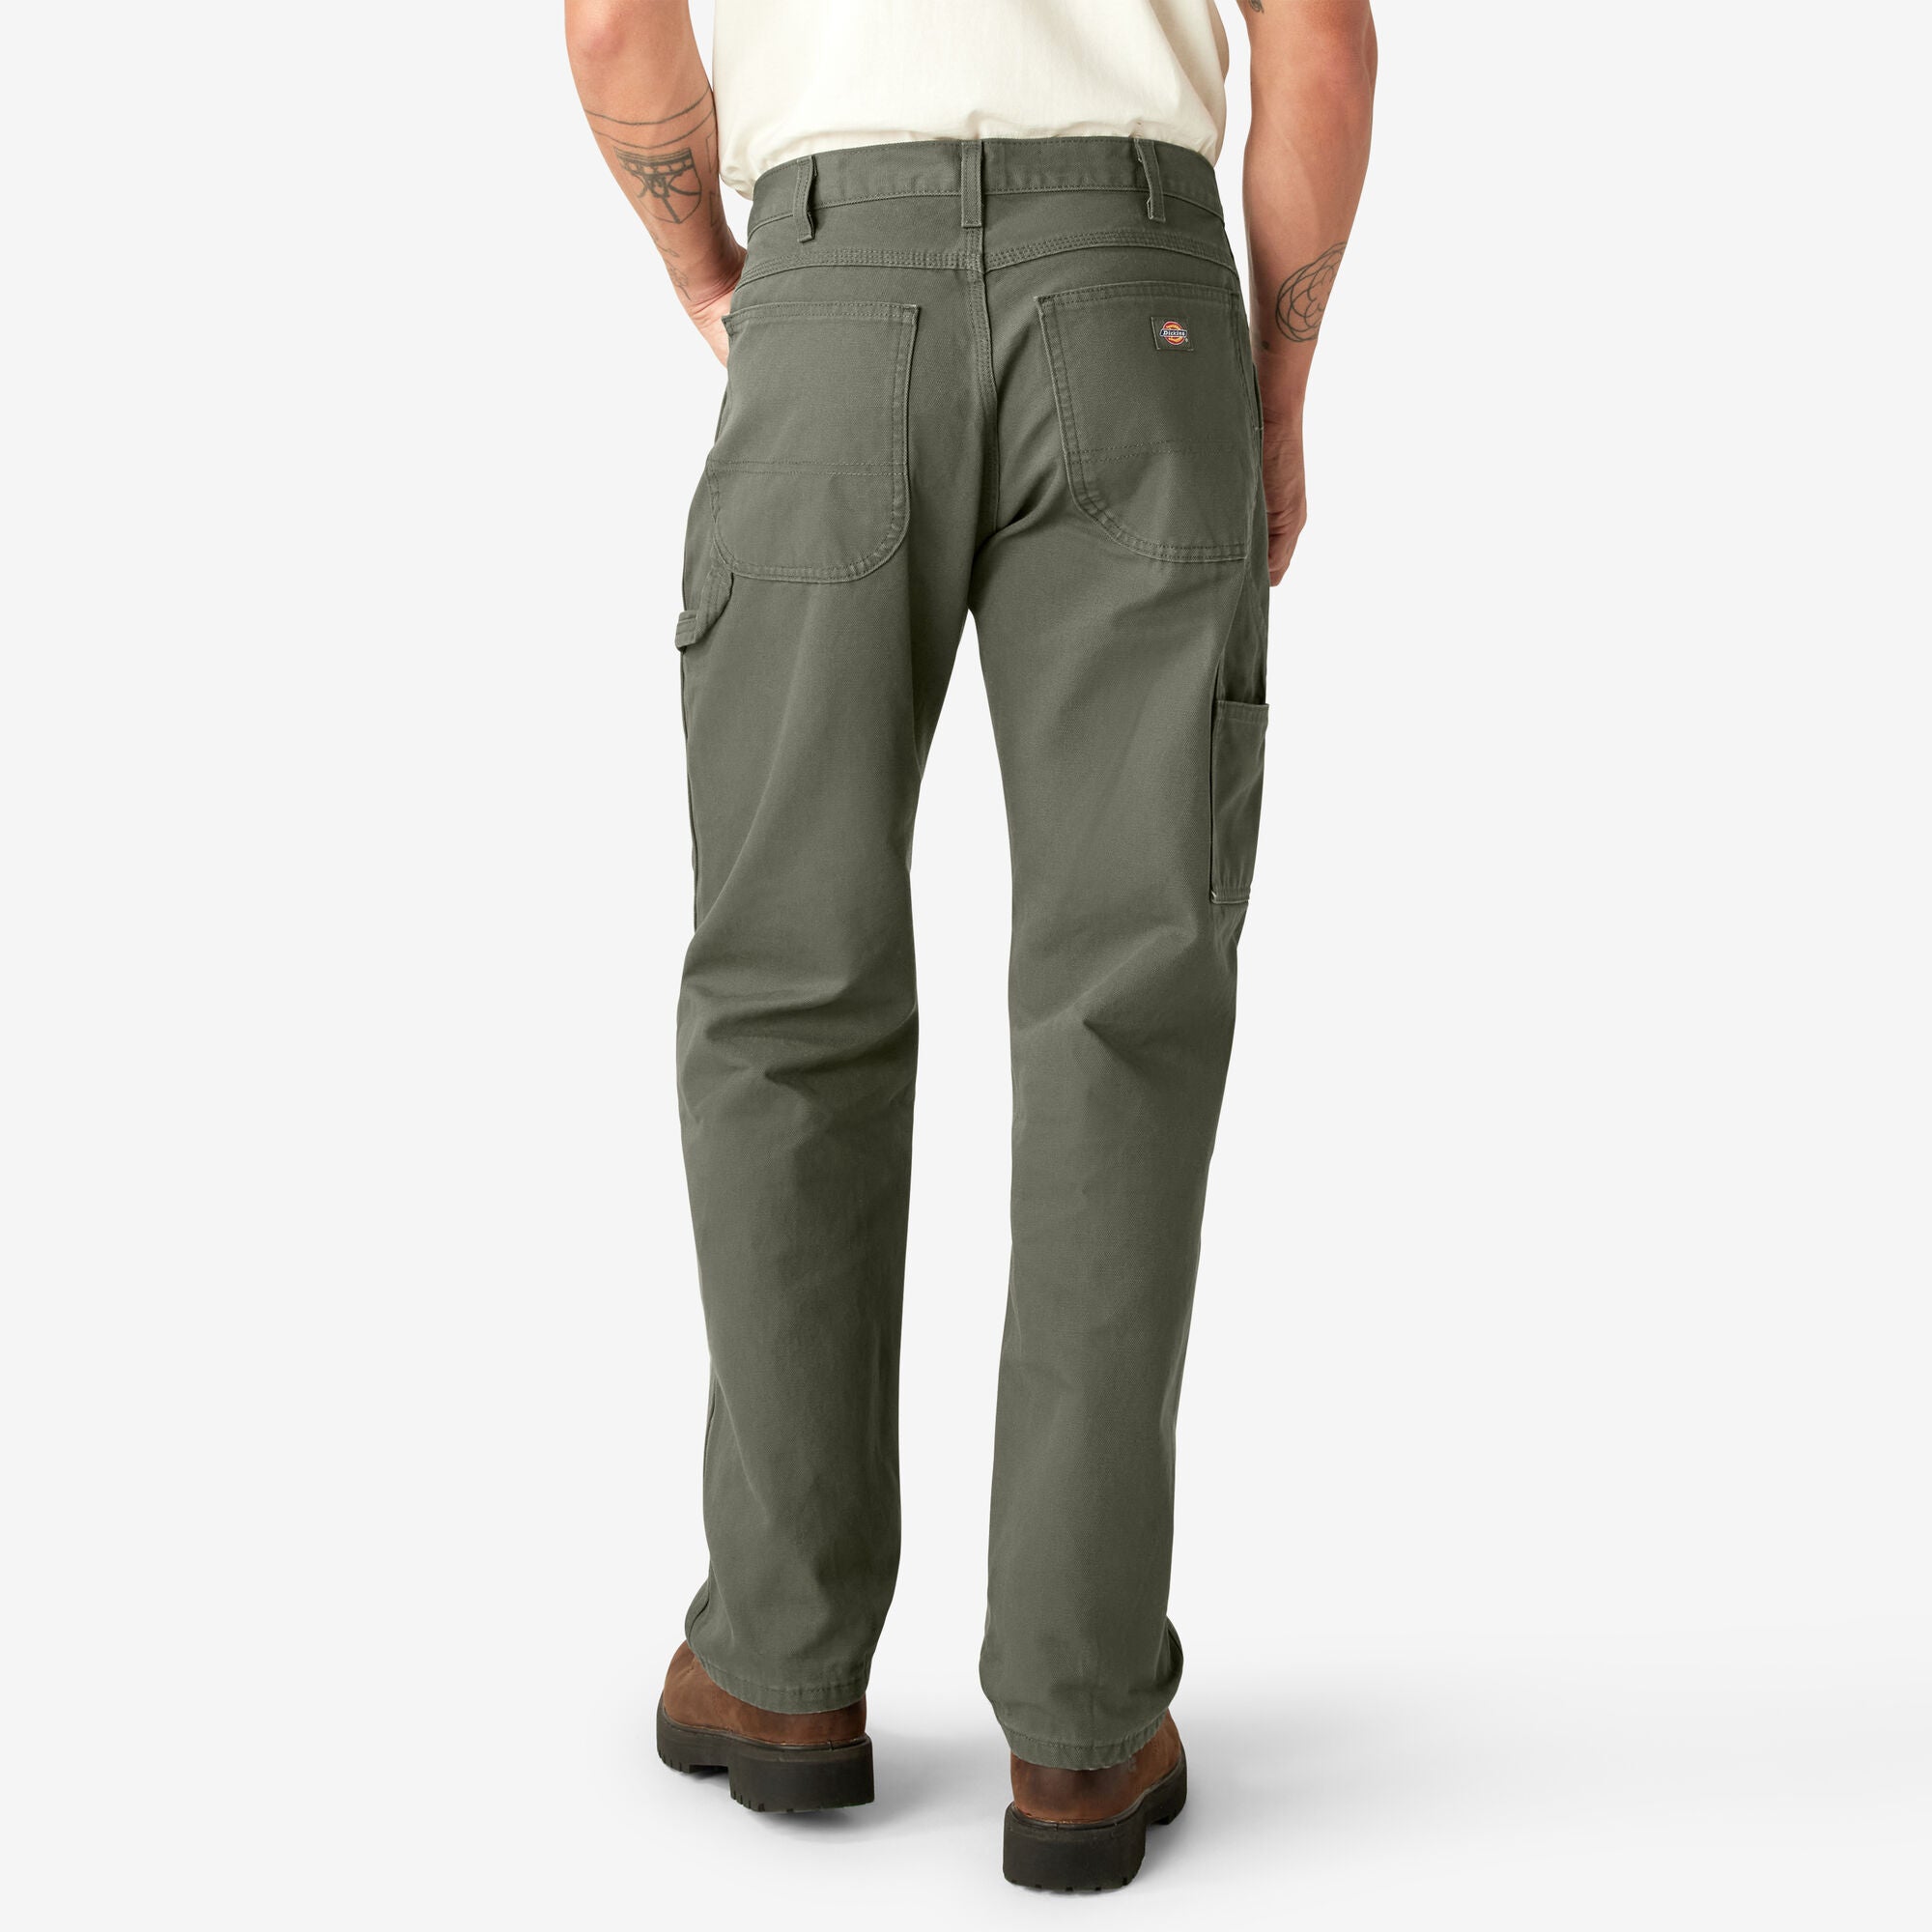 Dickies 1939 Relaxed Fit Carpenter Pants - Rinsed Moss Green